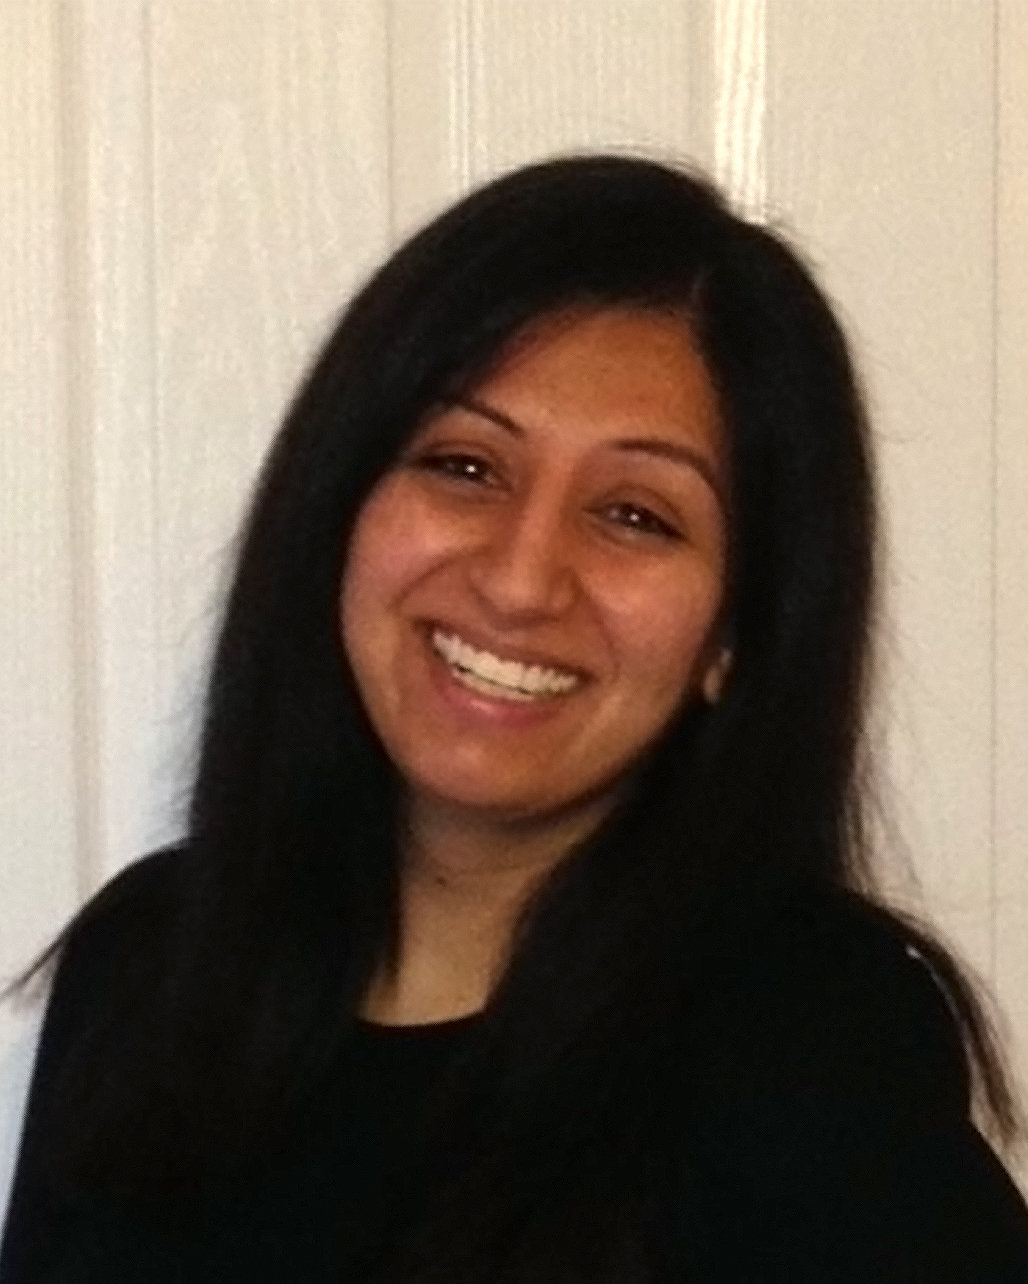 Parveen Sidhu Solicitor in Dispute Resolution at Lawson-West Solicitors Leicester